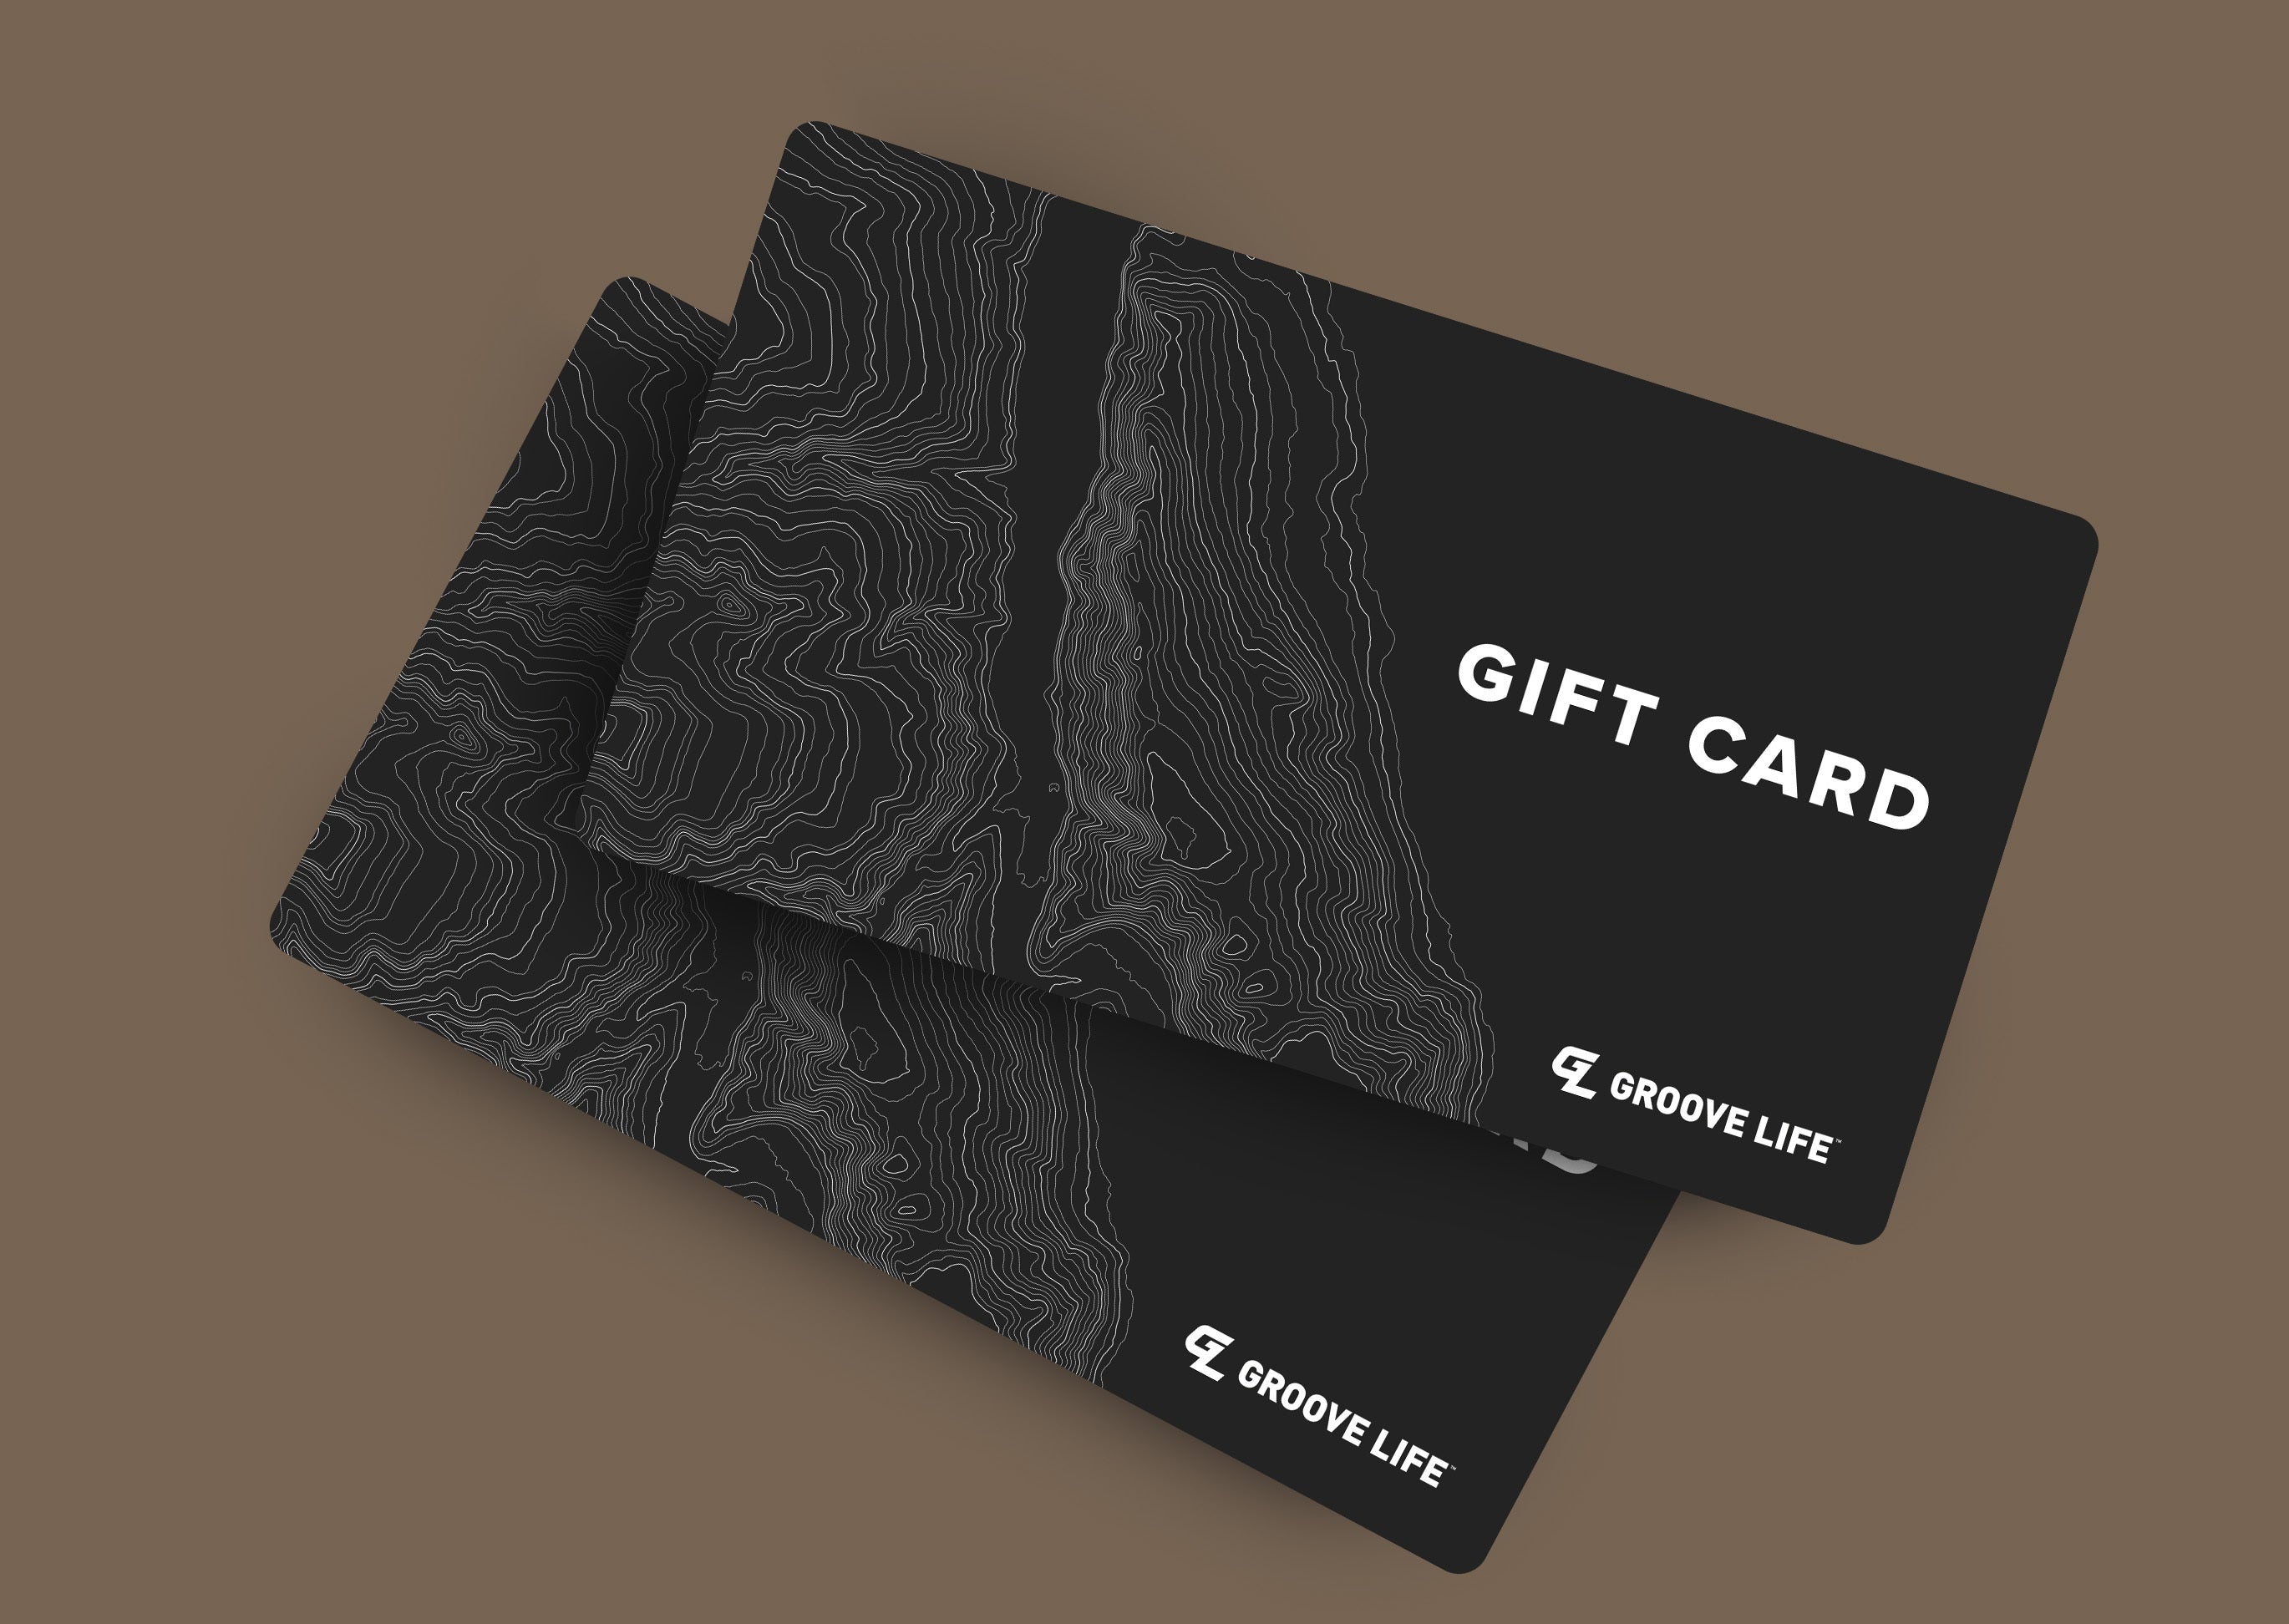 Groove Life gift cards